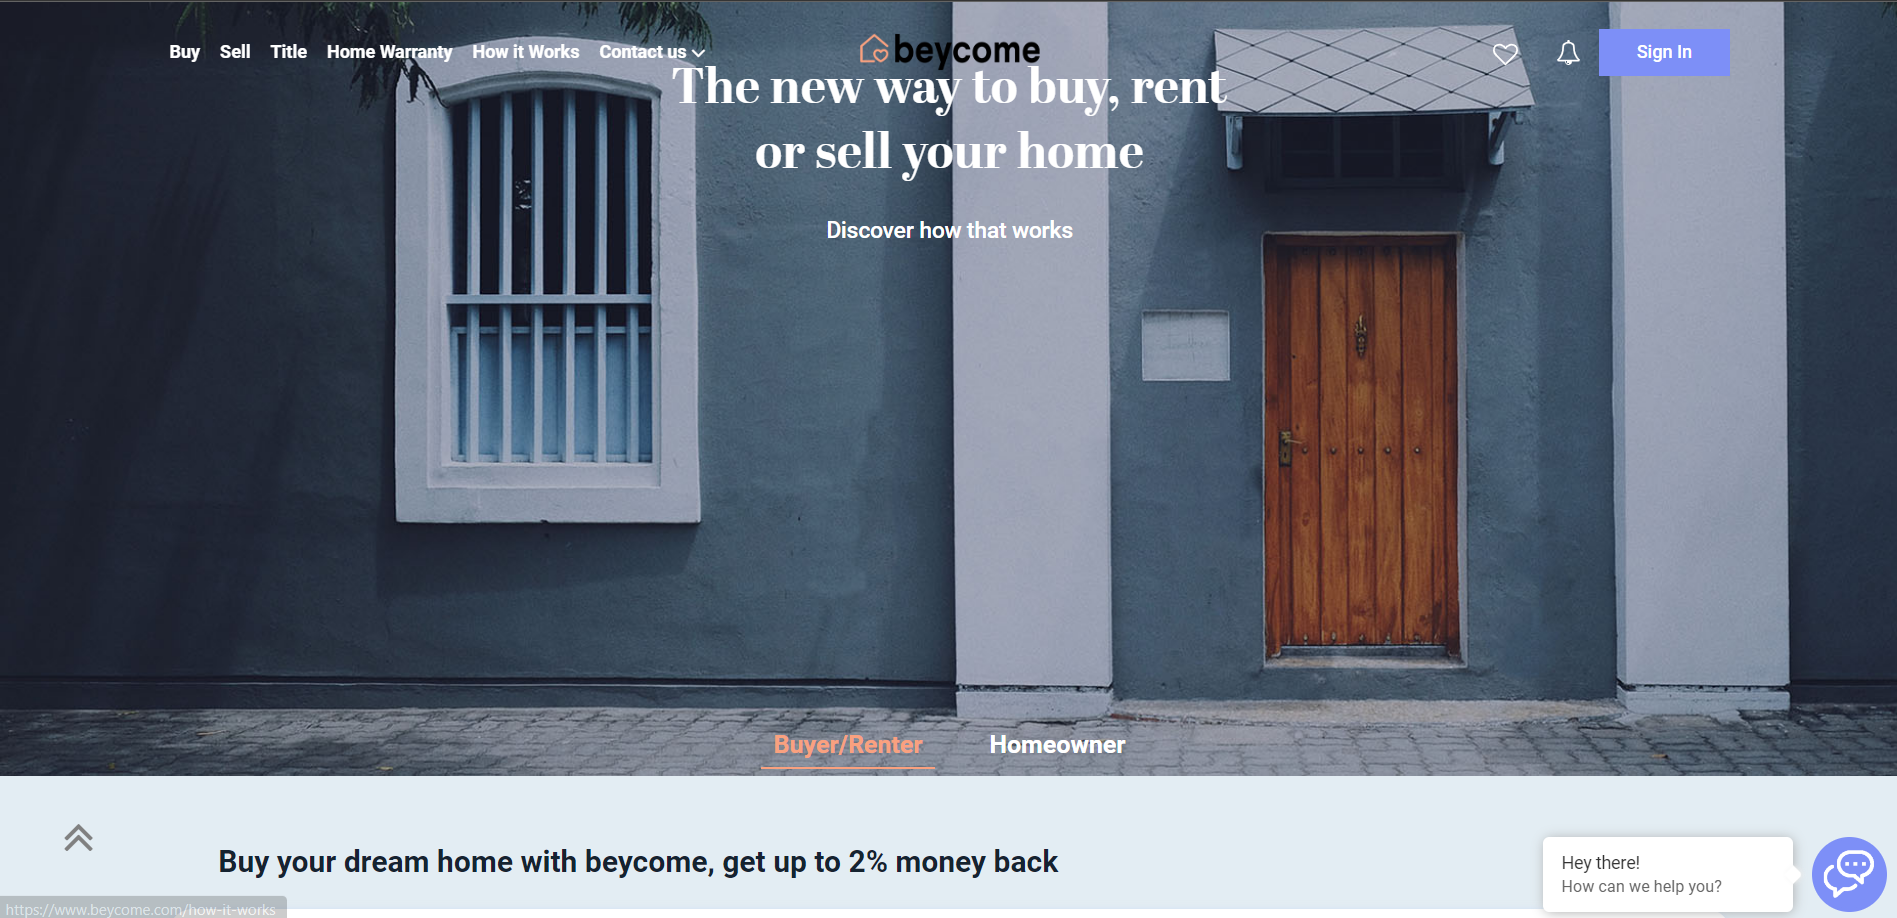 Beycome’s landing page